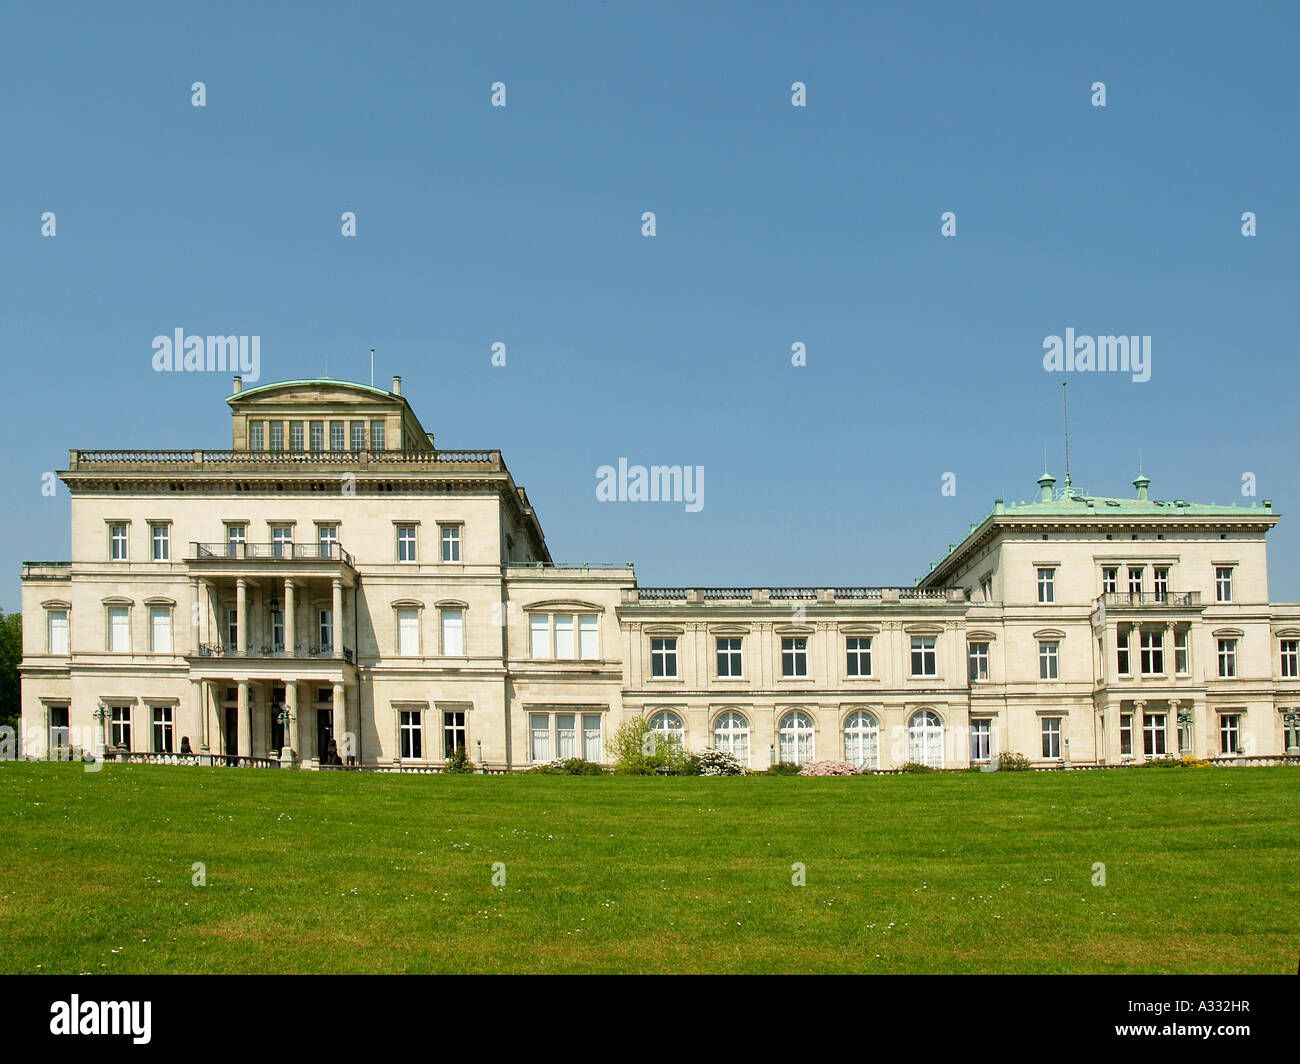 Villa Hügel Classical chateau type residence built from 1868 to 1872 according to plans by Alfred Krupp Essen Stock Photo